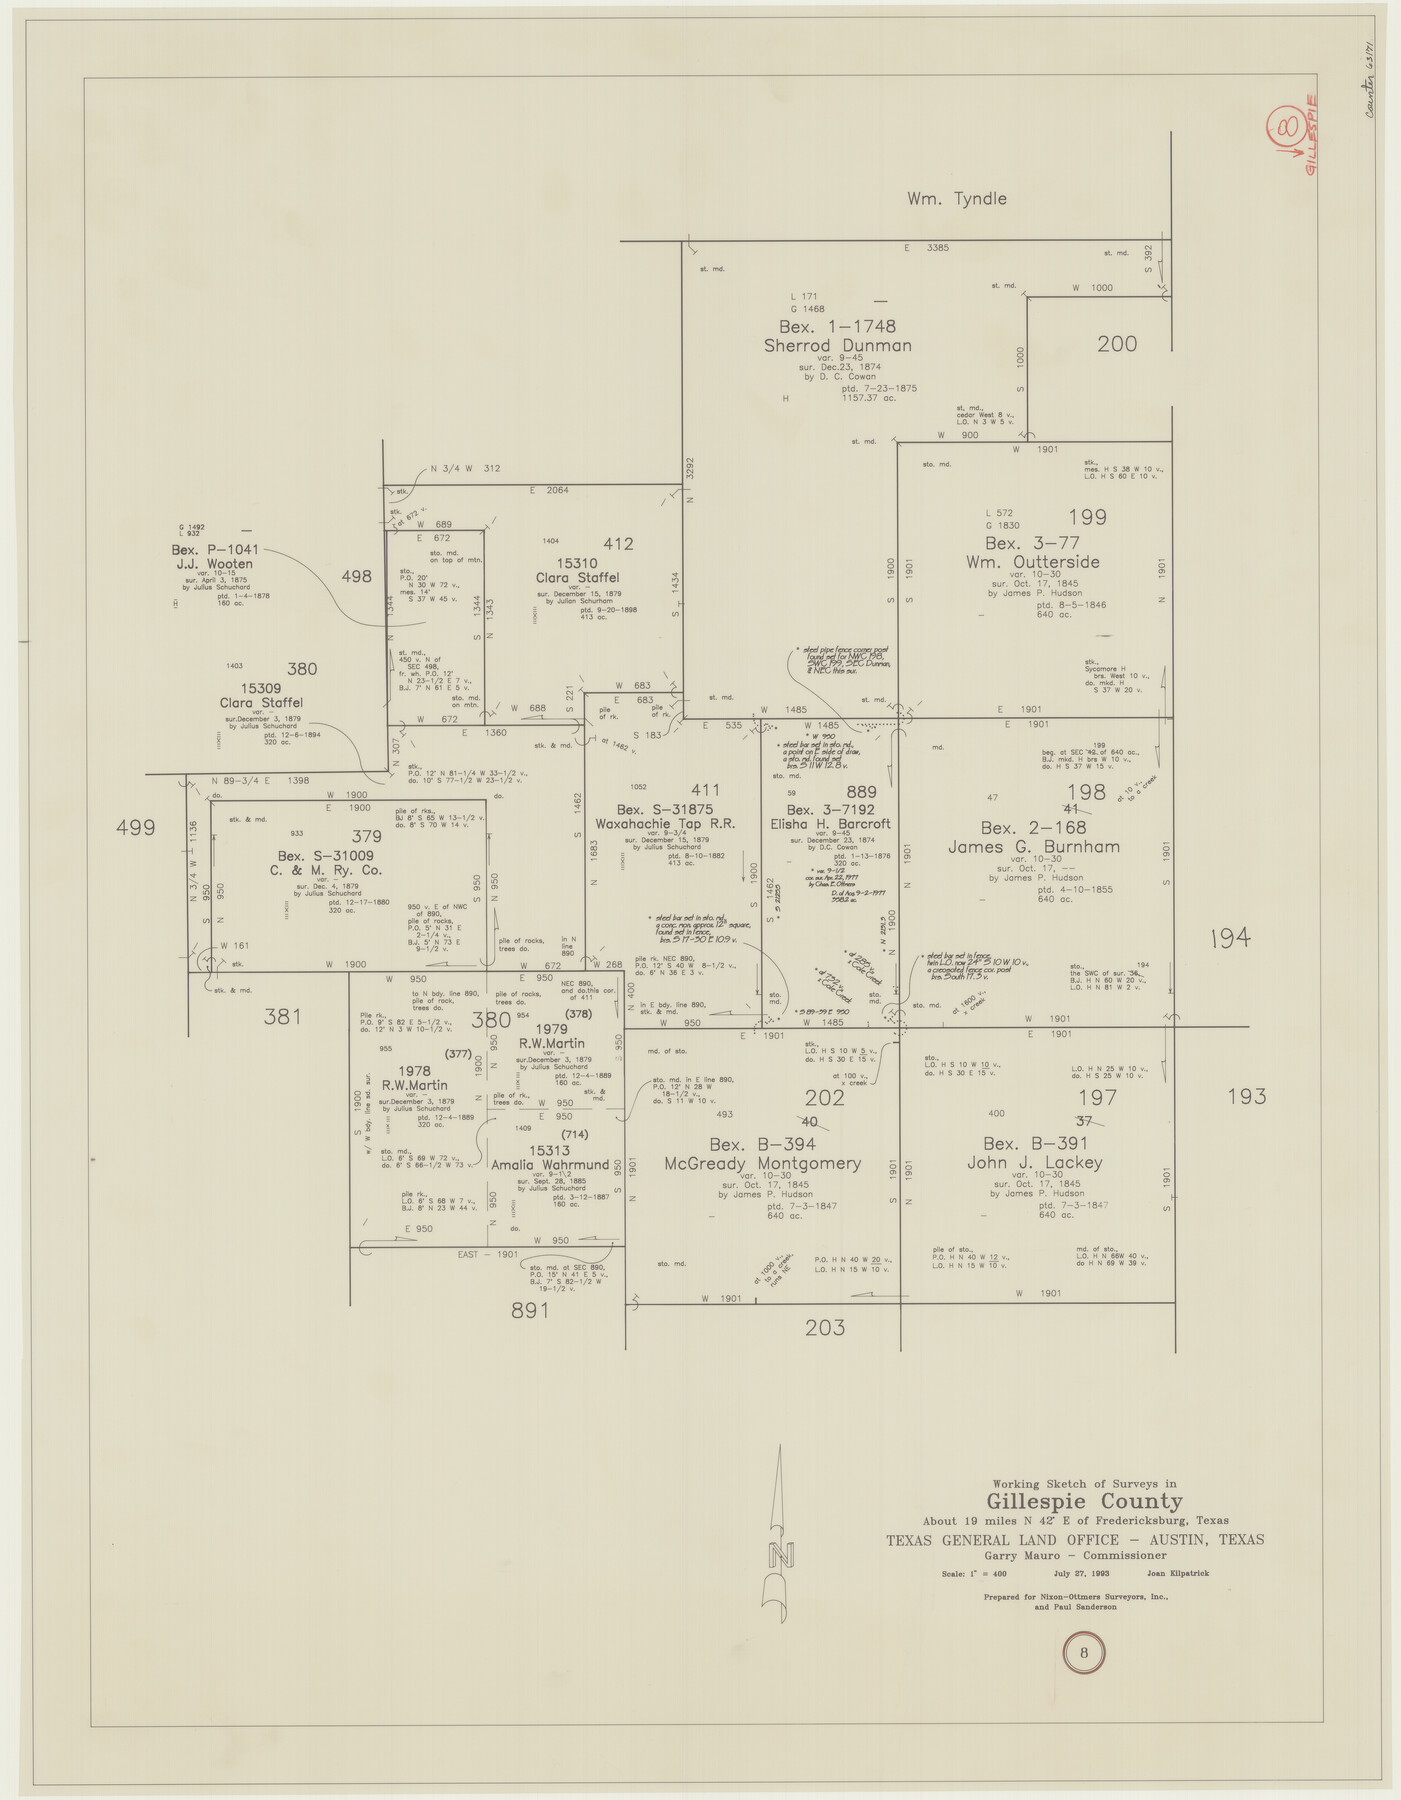 63171, Gillespie County Working Sketch 8, General Map Collection